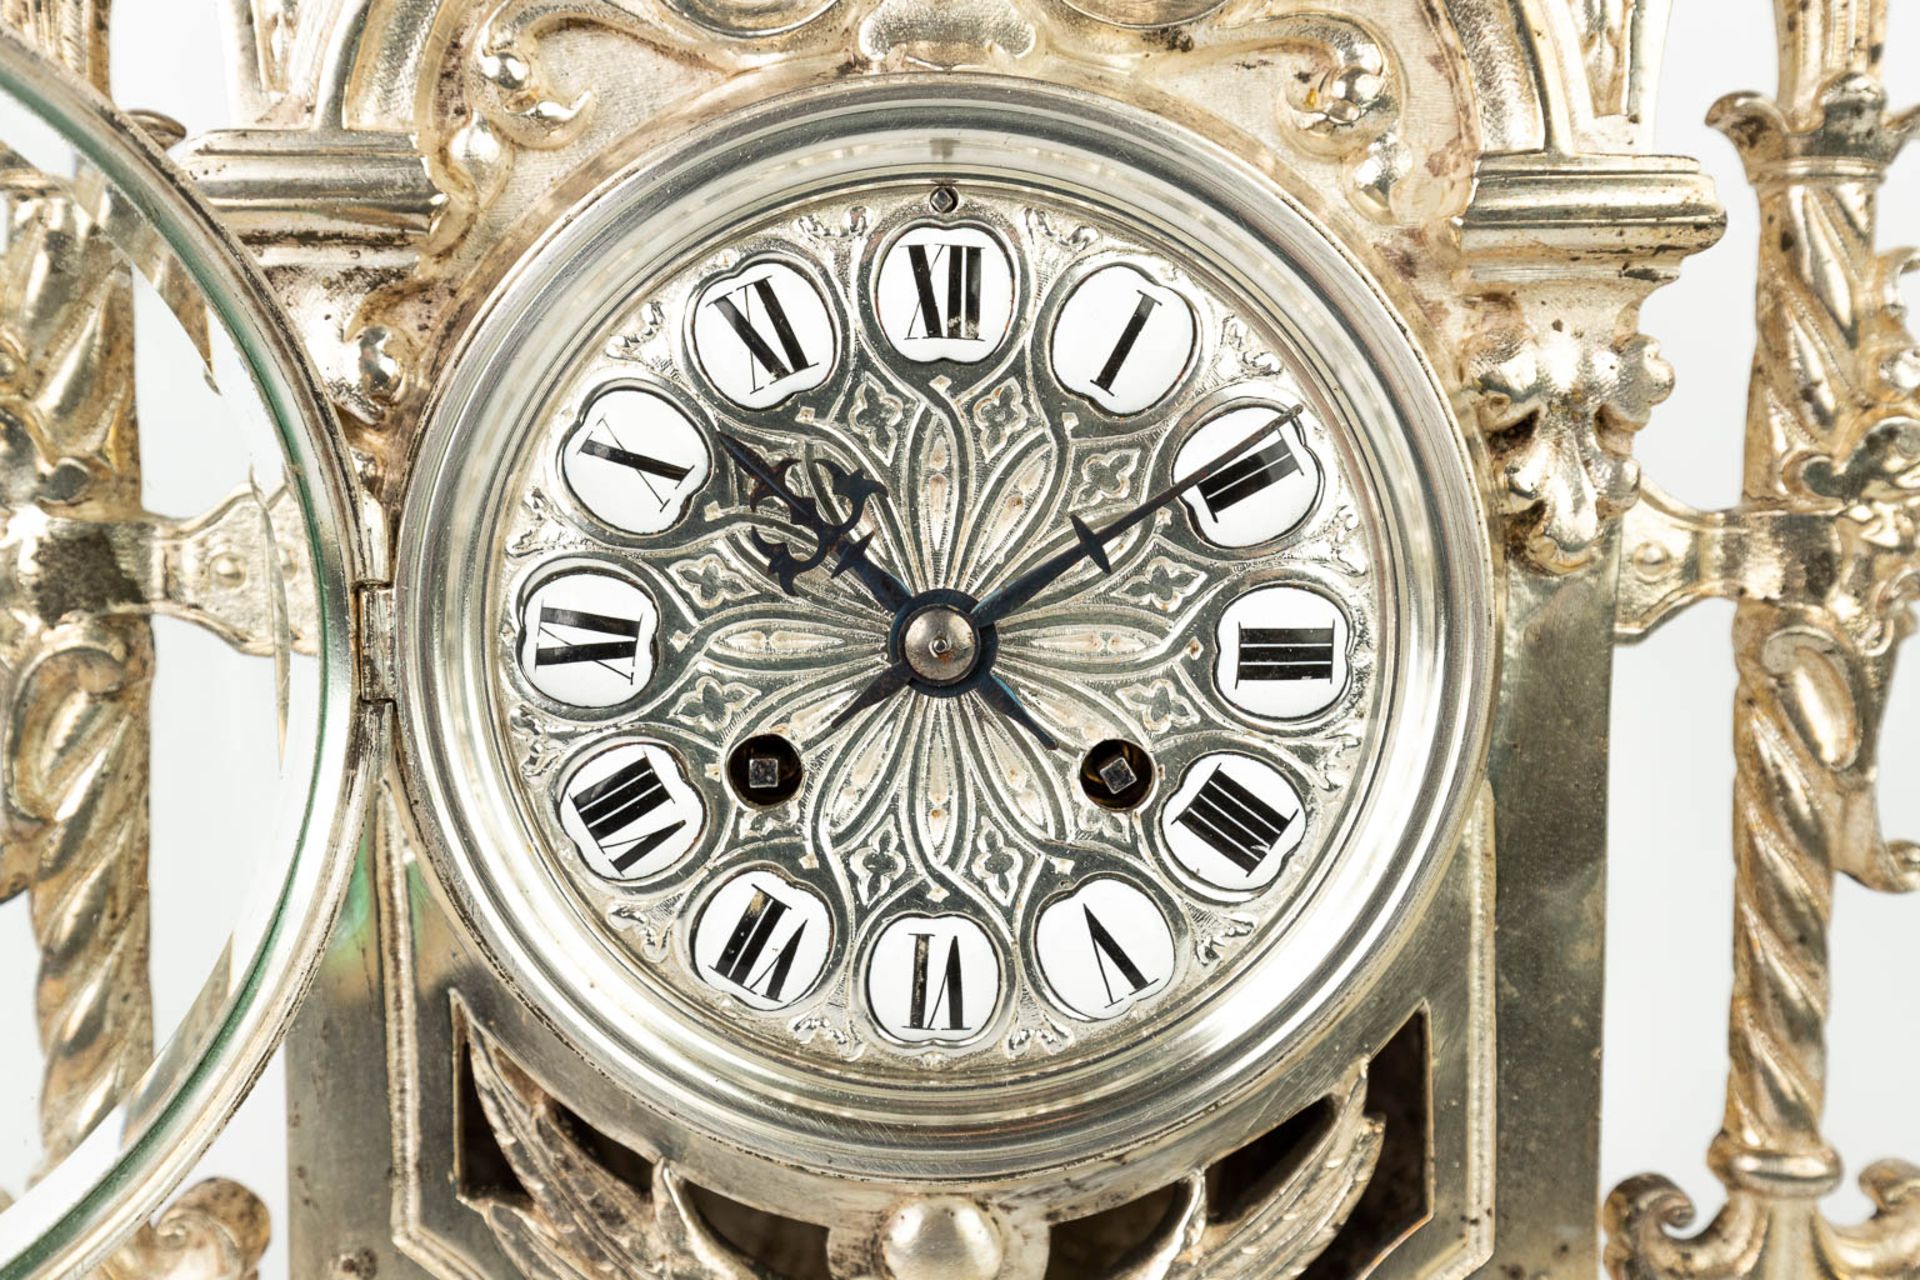 A three-piece garniture clock with candelabra, made of silver-plated bronze in gothic revival style. - Image 14 of 18